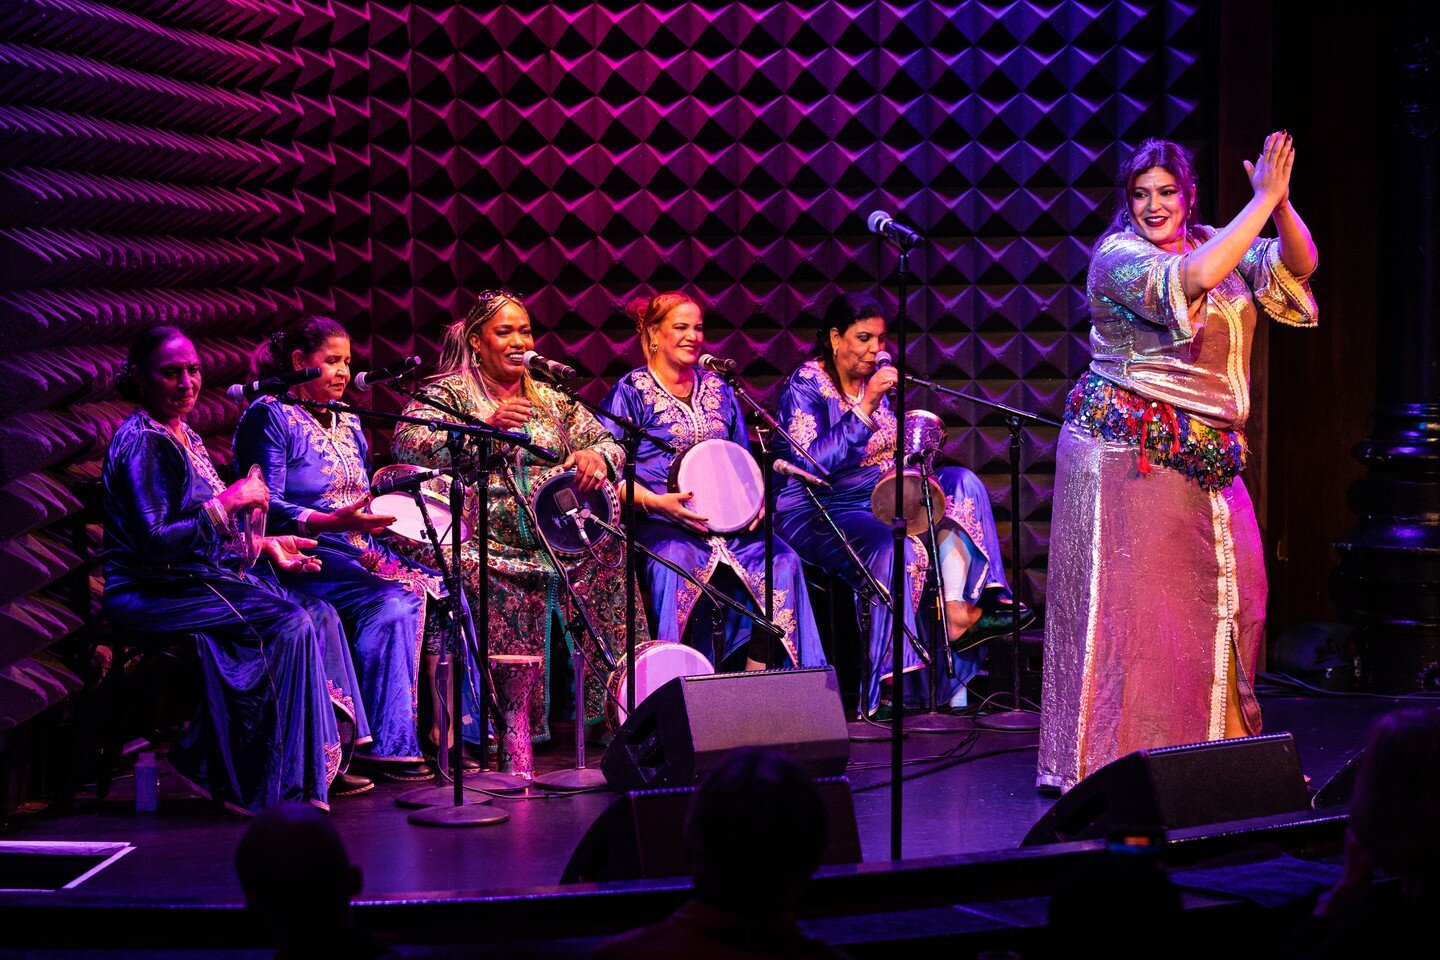 Beyond ecstatic to share that Khadija ElWarzazia's Bnat el Houariyat with Esraa Warda will return to New York City as part of the 20th Annual @globalfest_nyc at @lincolncenter on Jan 15, 2023! Tickets are now on sale - learn more and even become at g